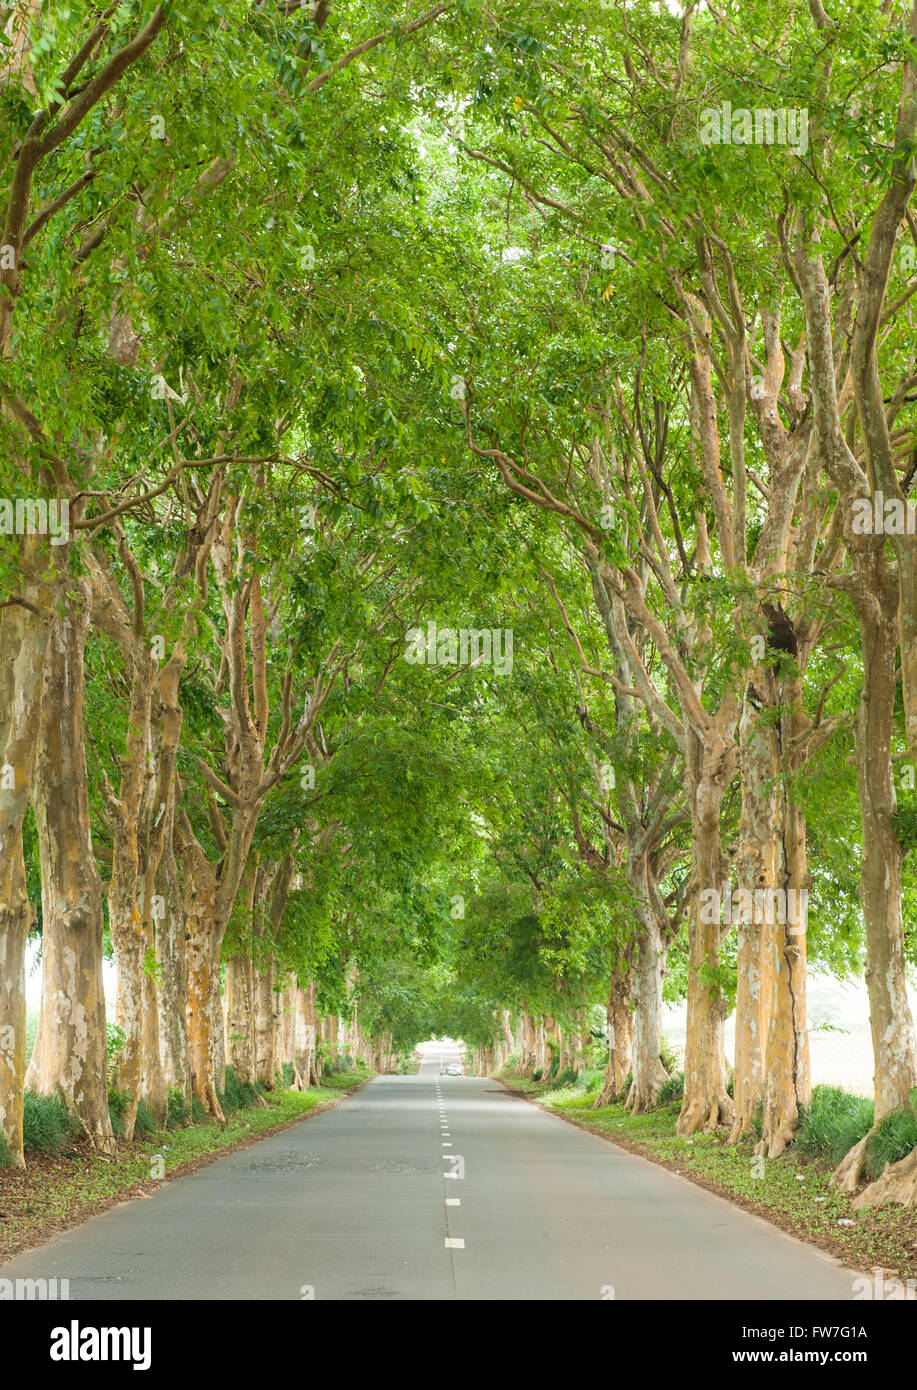 A tree lined road in Mauritius. Stock Photo